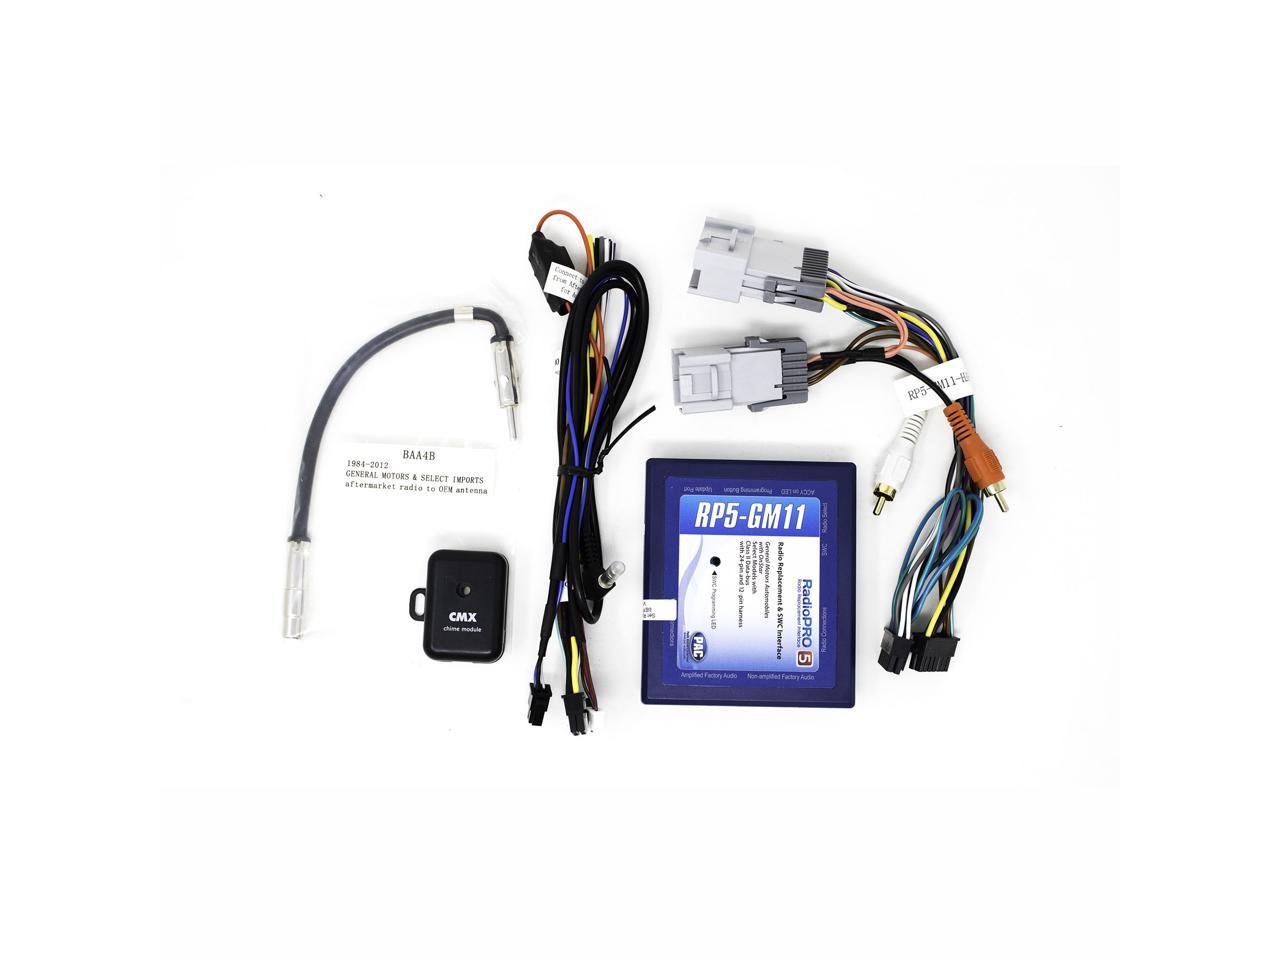 r Class Ii Vehicles With Pac Rp5-gm11 Radiopro5 Interface For Select Gm 